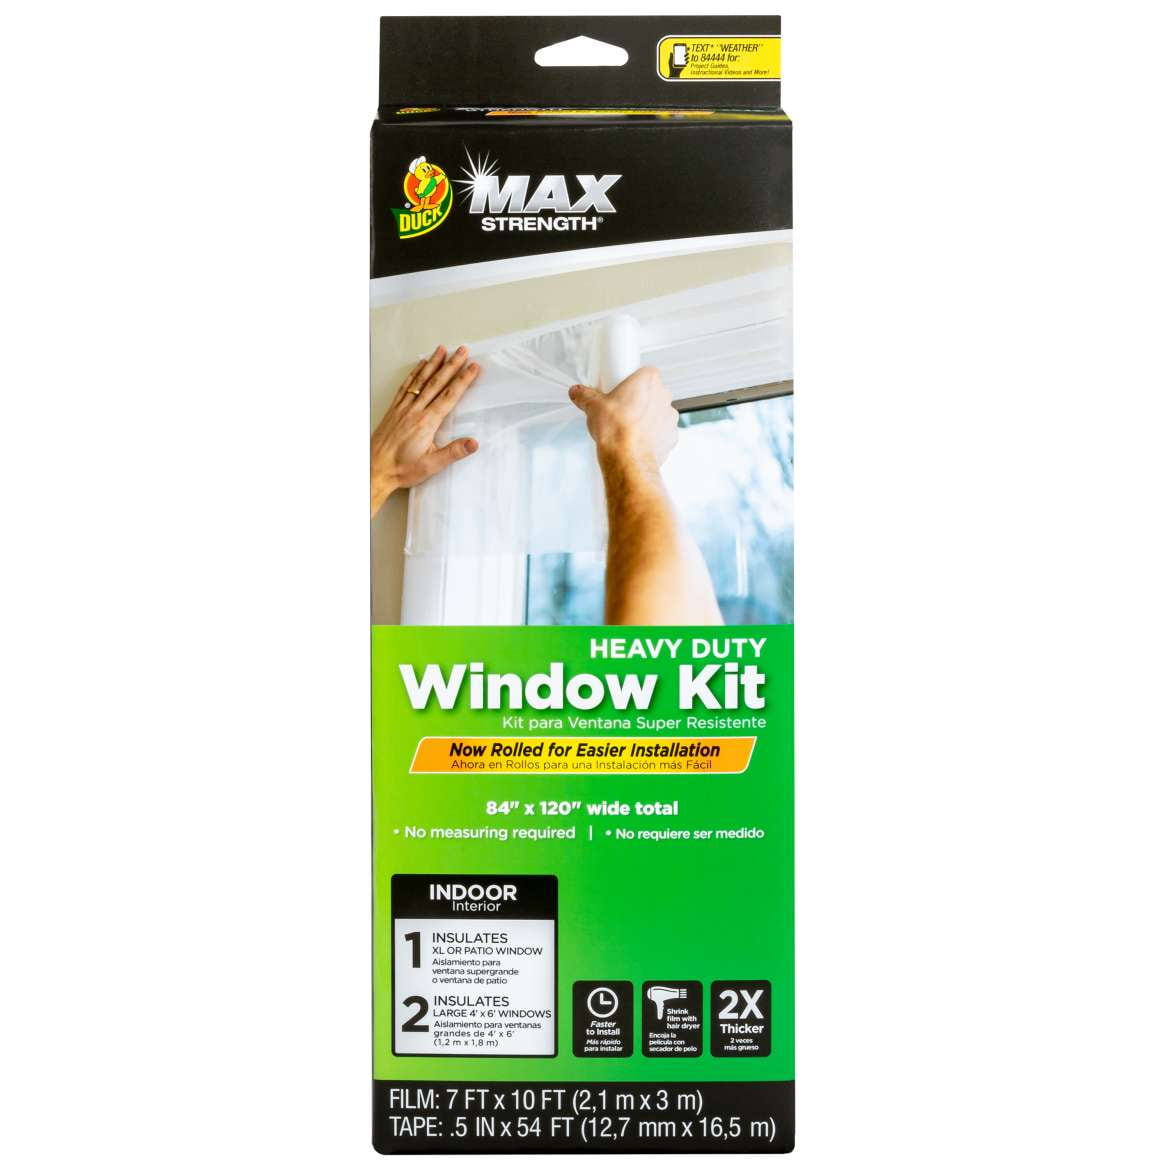 Duck Max Strength 84” x 112” Clear Roll-on Patio Window Insulation Kit 